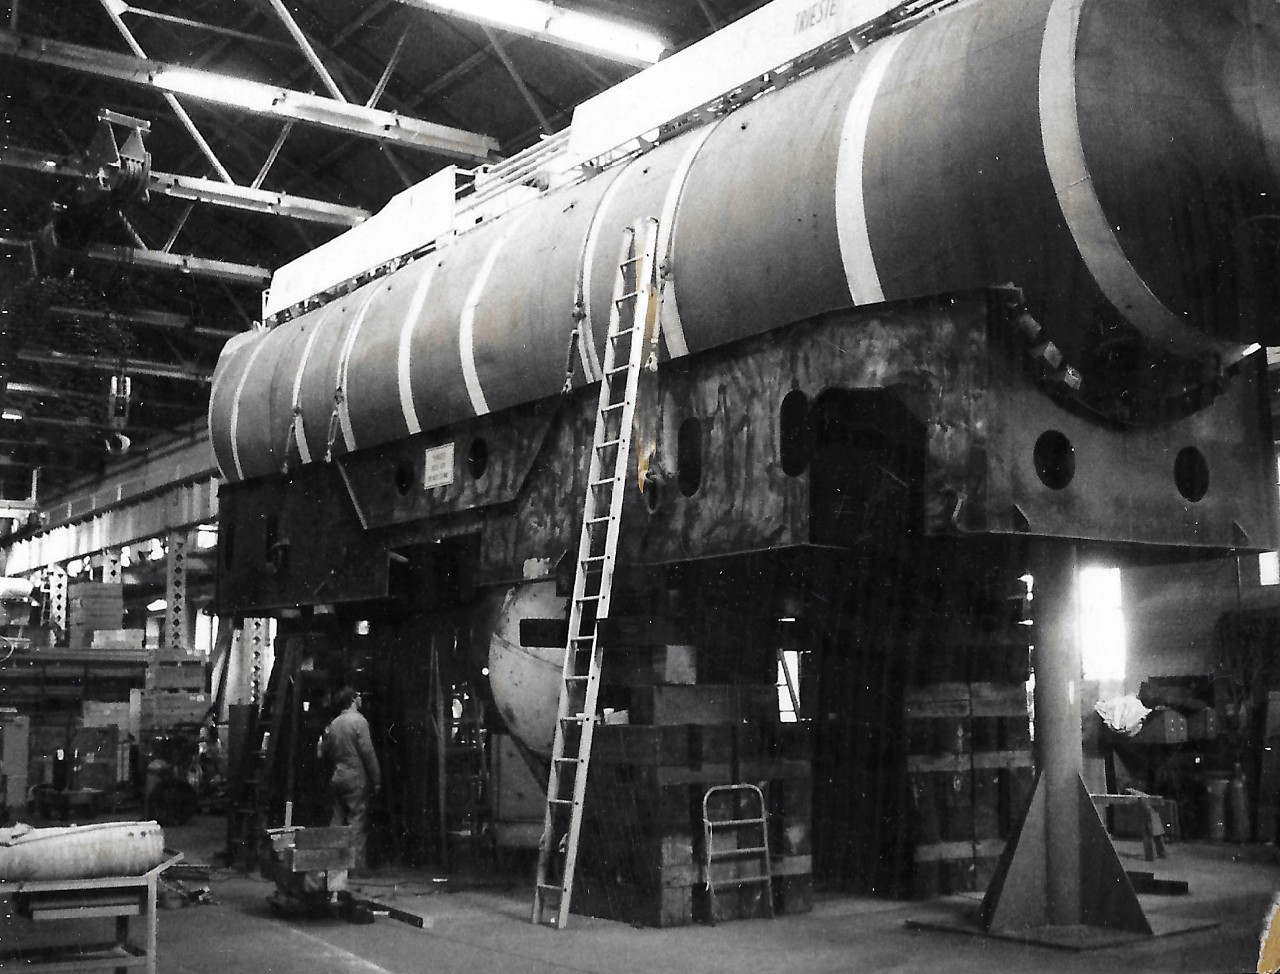 NMUSN-626:   Bathyscaph Trieste, 1976-1977.    Trieste being installed at the Navy Memorial Museum, not National Museum of the U.S. Navy.    Note the bathyscaph is still in her cradle at this point.    National Museum of the U.S. Navy Photograph Collection.  